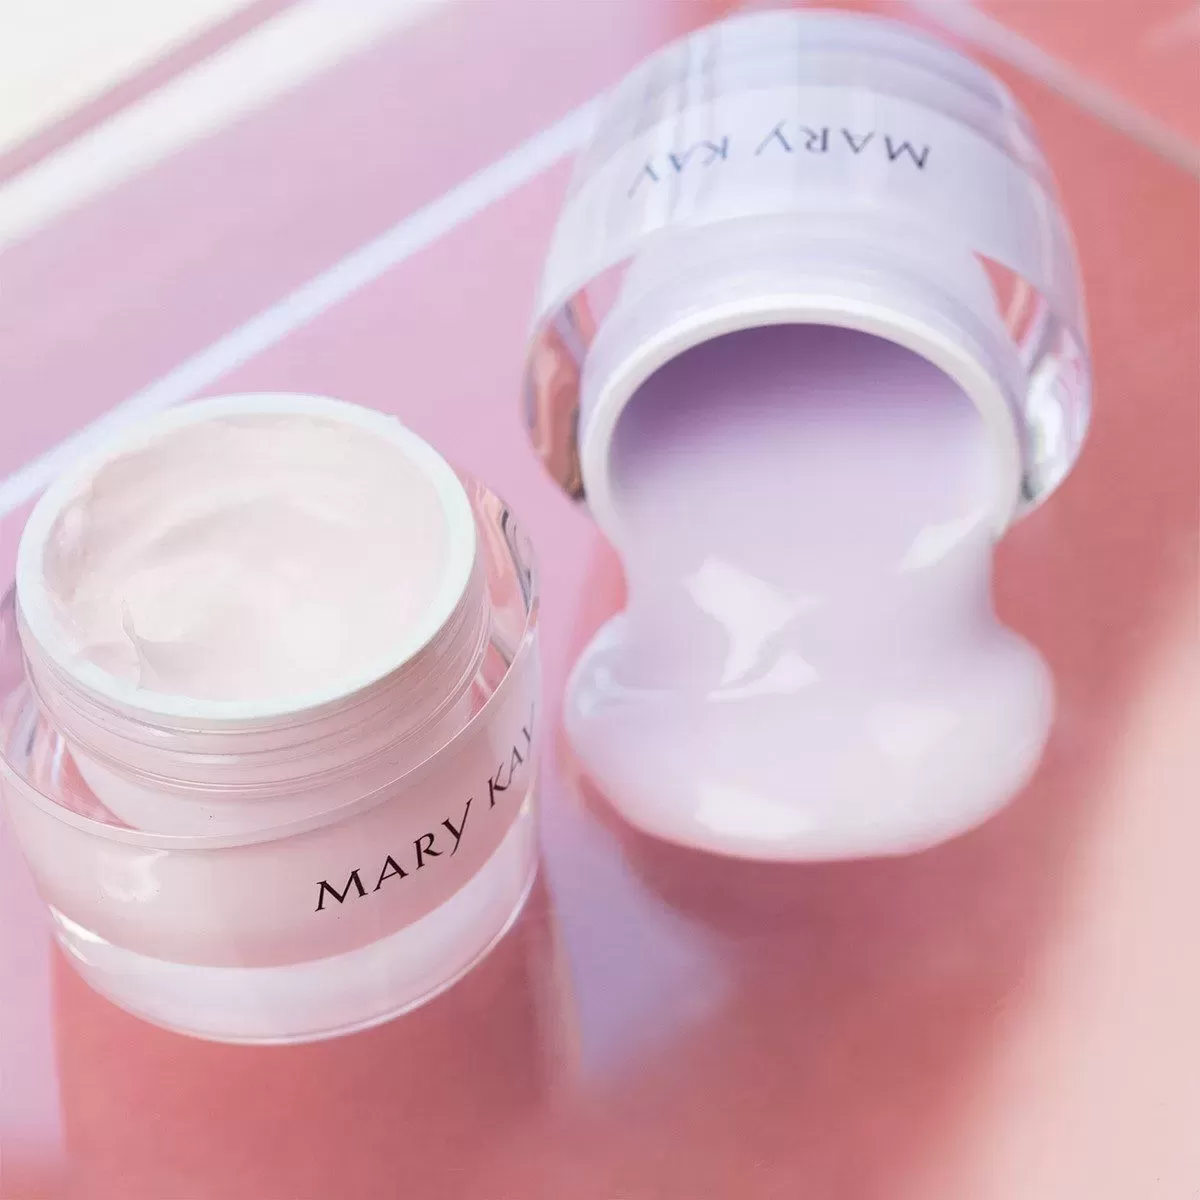 about Face Moisturizer MARY KAY  Moisturizing Cream for dry skin